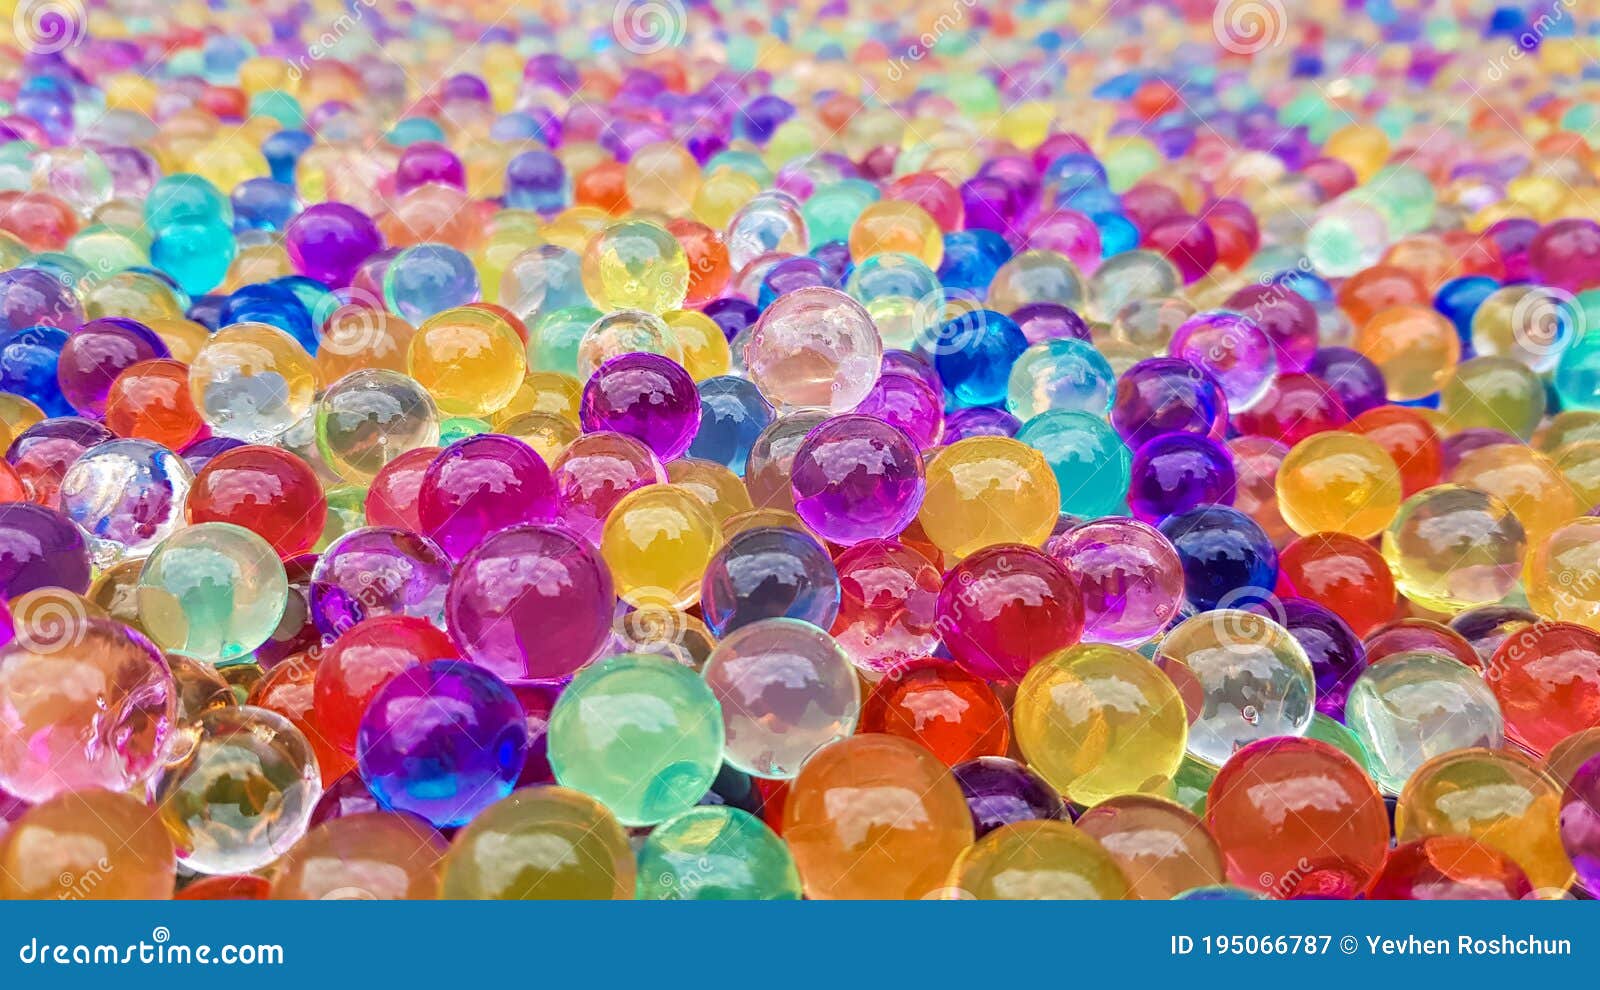 13,441 Blue Water Beads Royalty-Free Images, Stock Photos